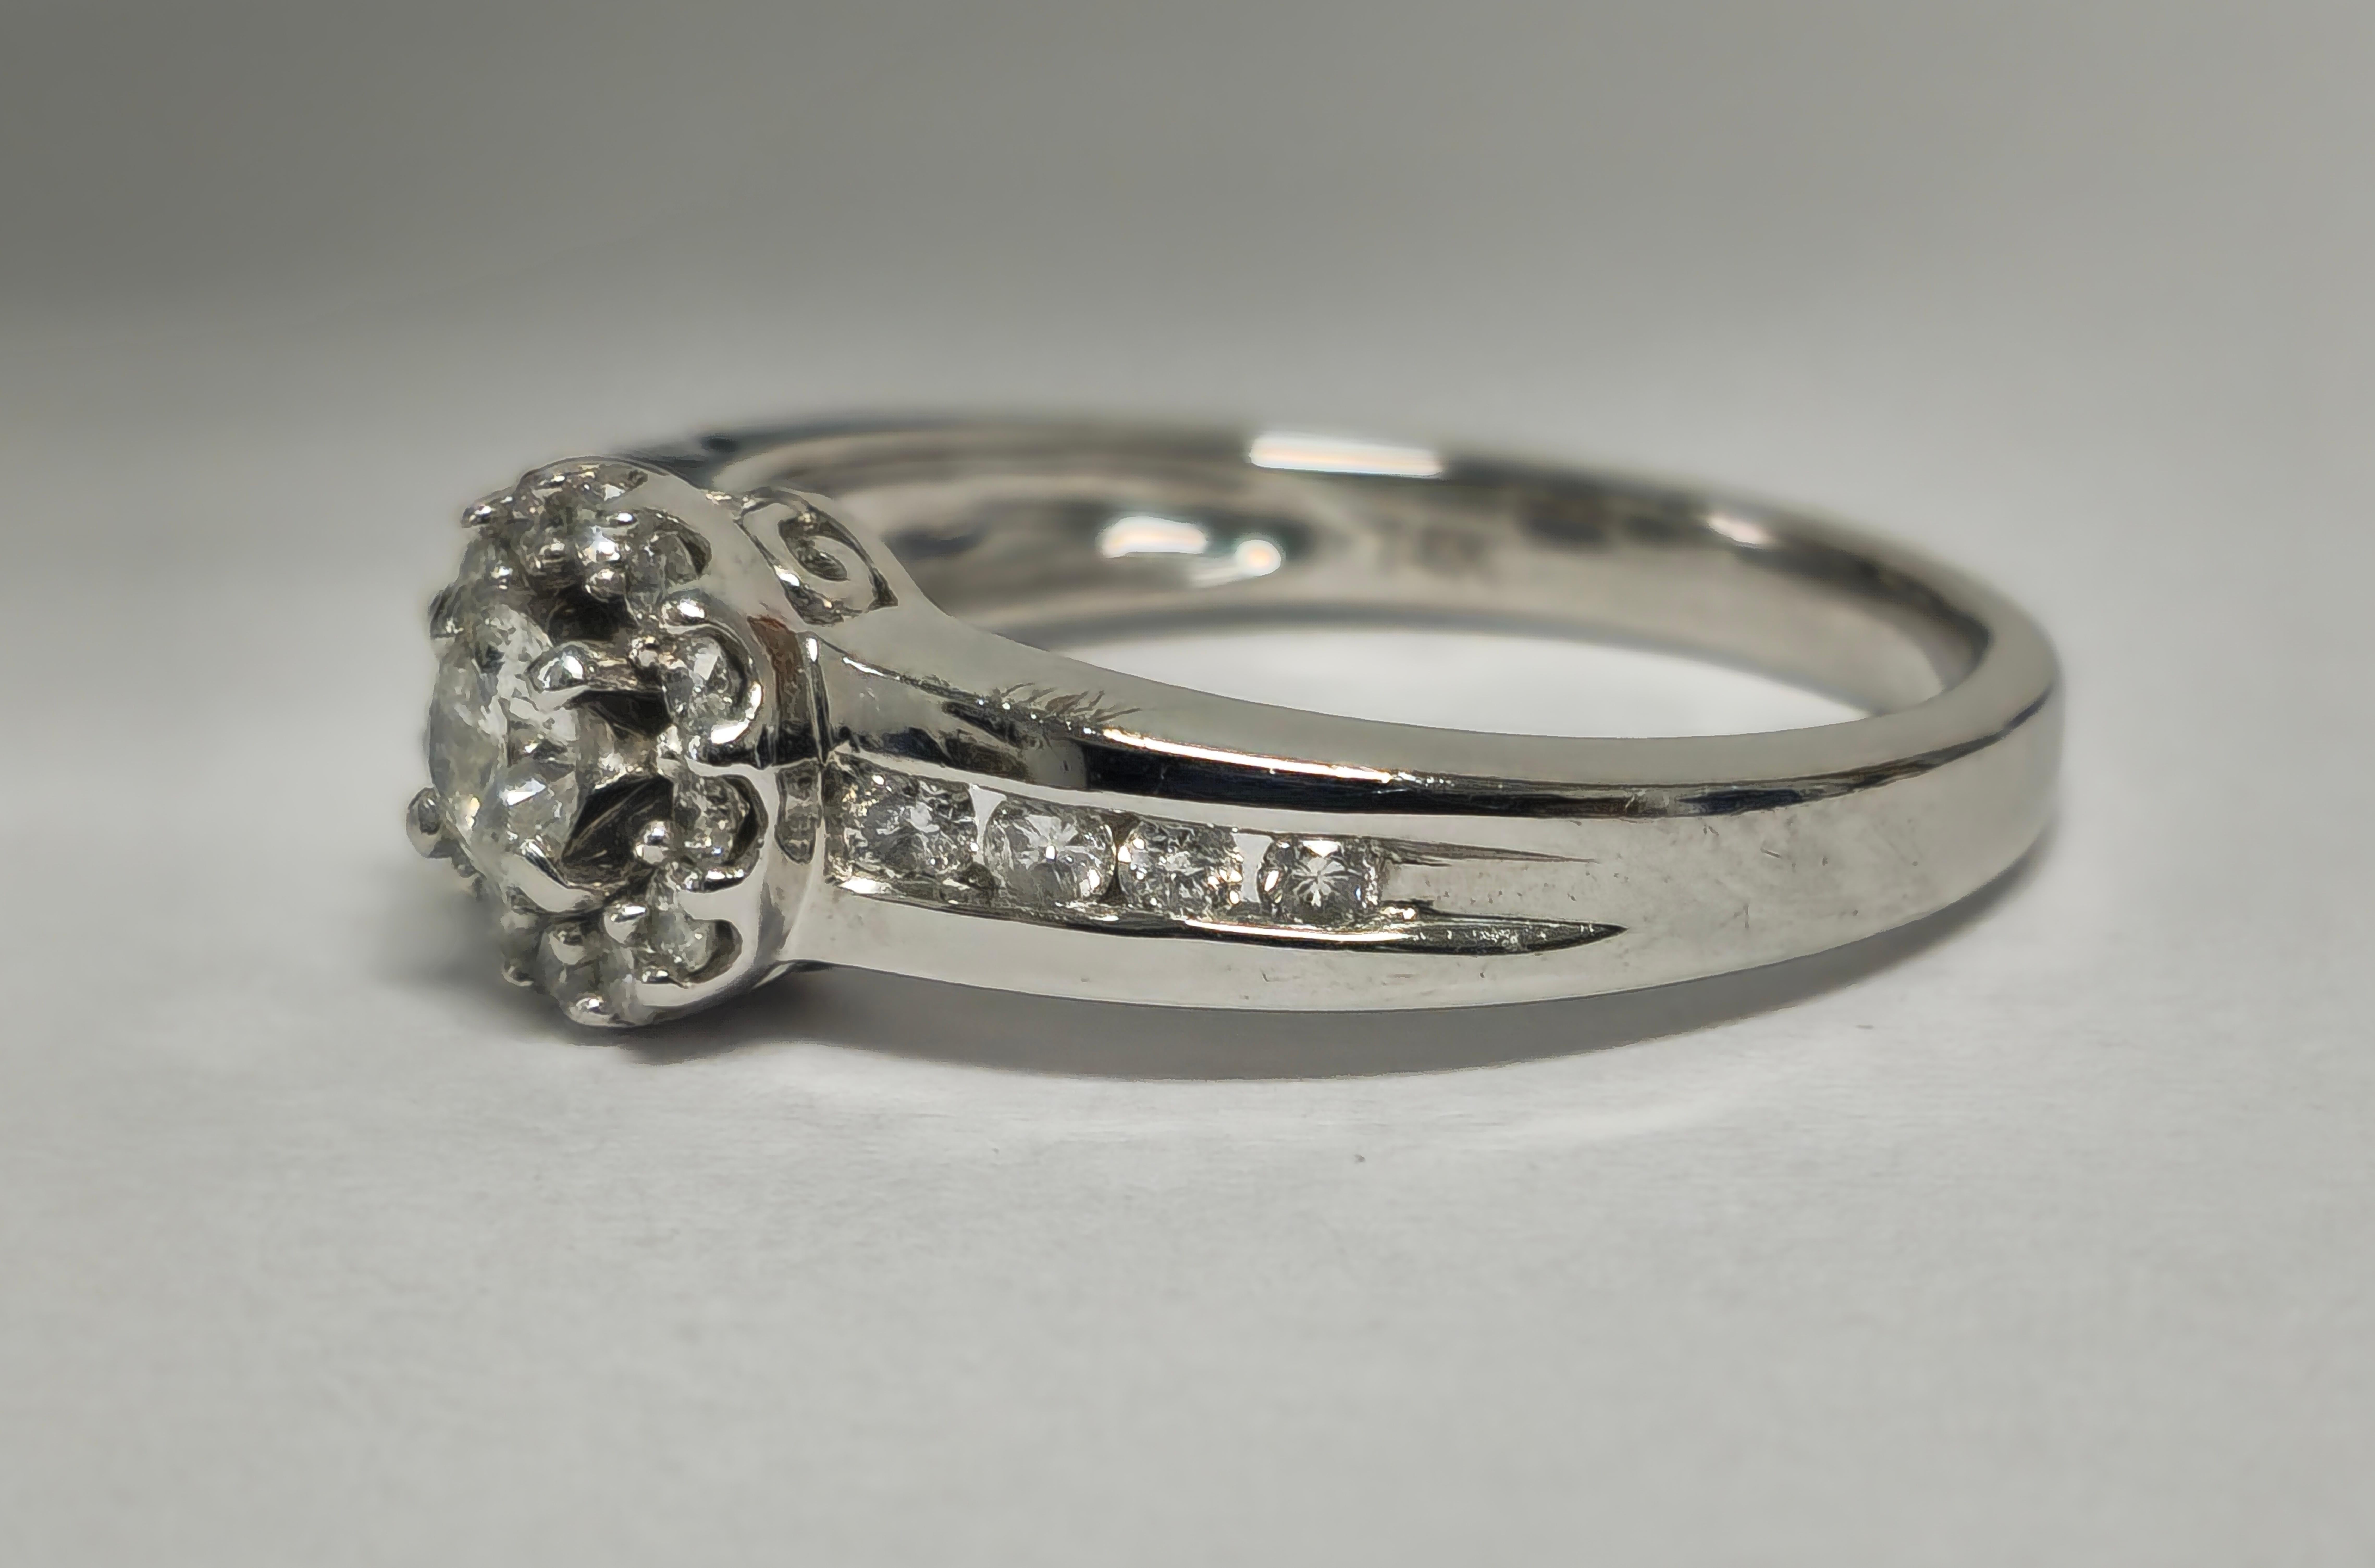 0.85 Carat Diamond White Gold Engagement Ring In Excellent Condition For Sale In Miami, FL